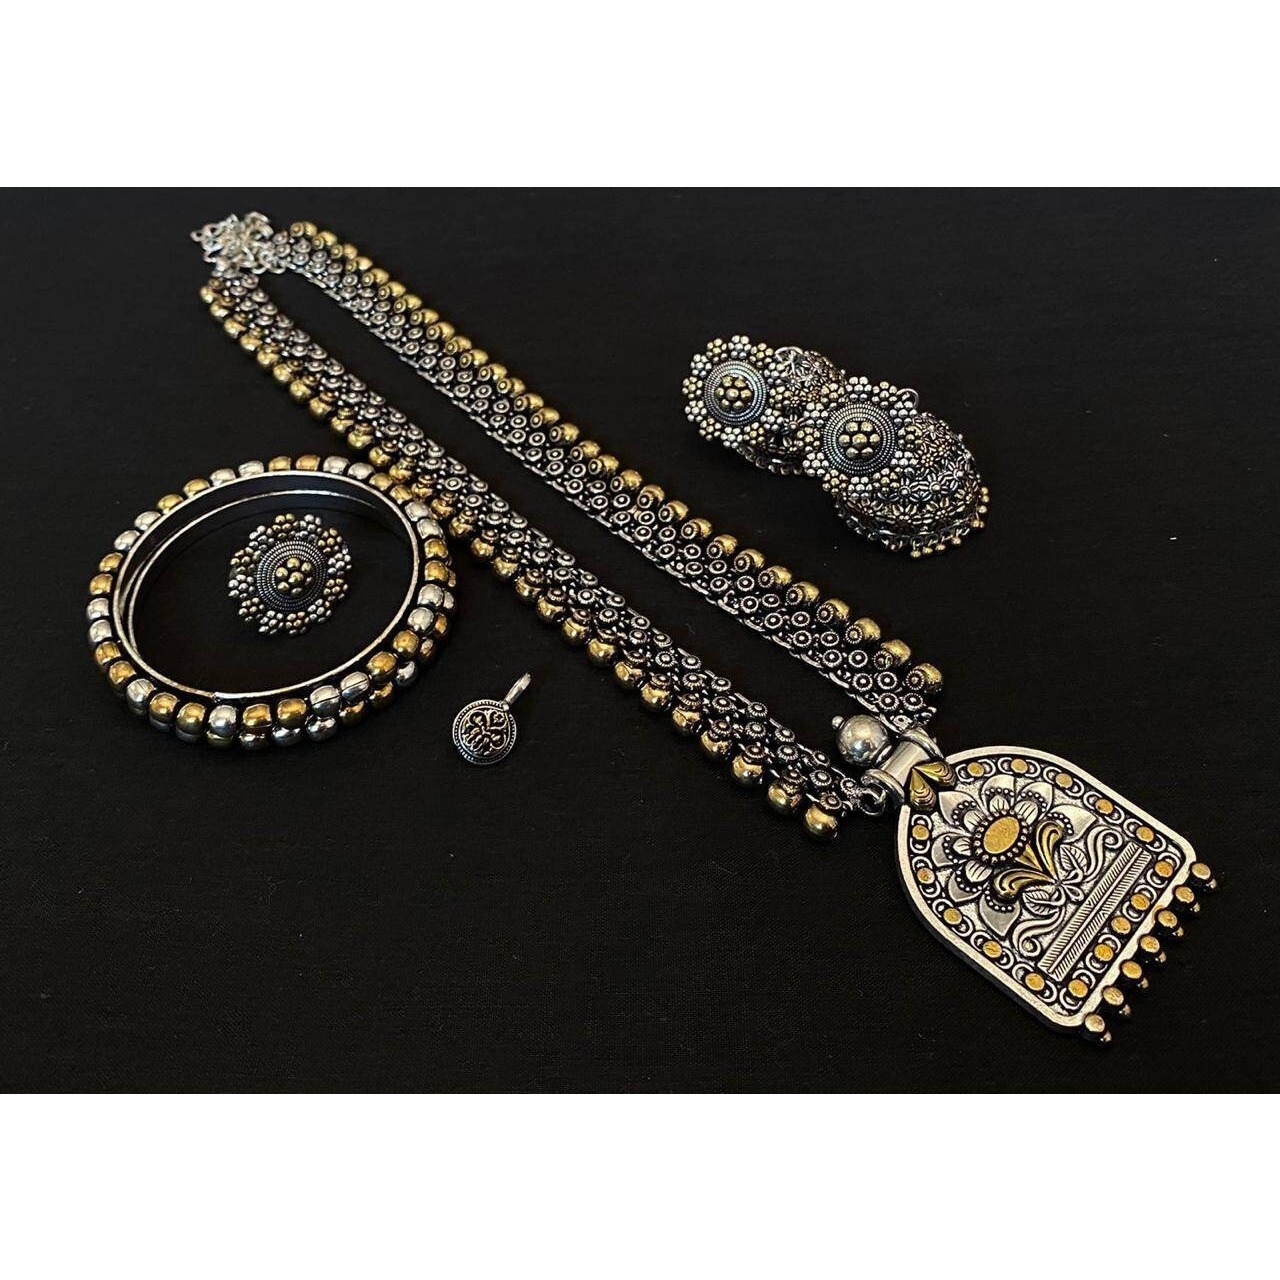 These beautiful peacock earrings in silver polish looks great with your casual/partywear dresses. All our earrings are handcrafted to perfection so that it can enhance the beauty of the woman.I am sure once you try you will always buy from us as we give genuine quality products, if you value quality then you can't miss these.